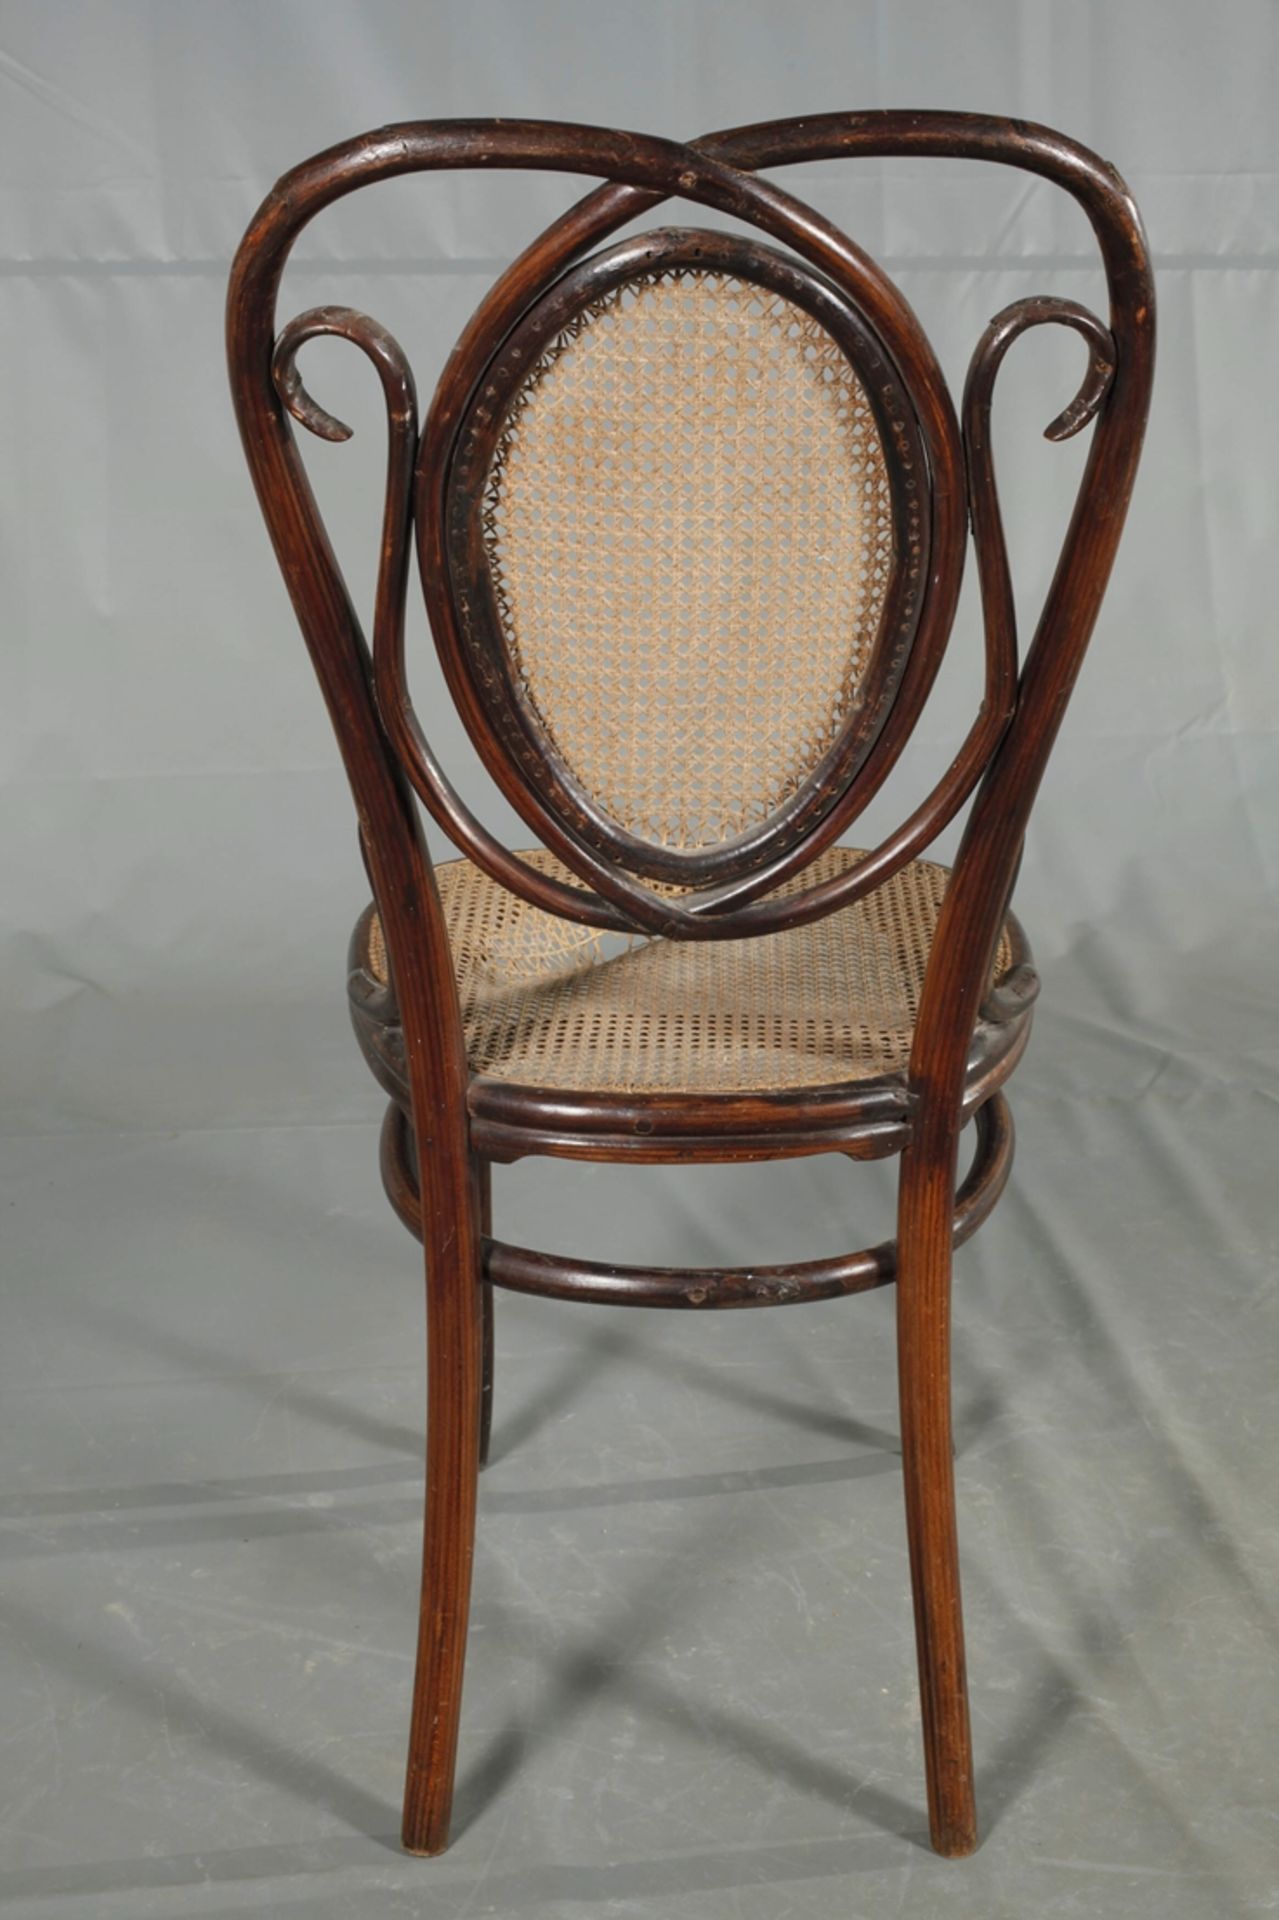 Early Thonet chair, model no. 22 - Image 5 of 6